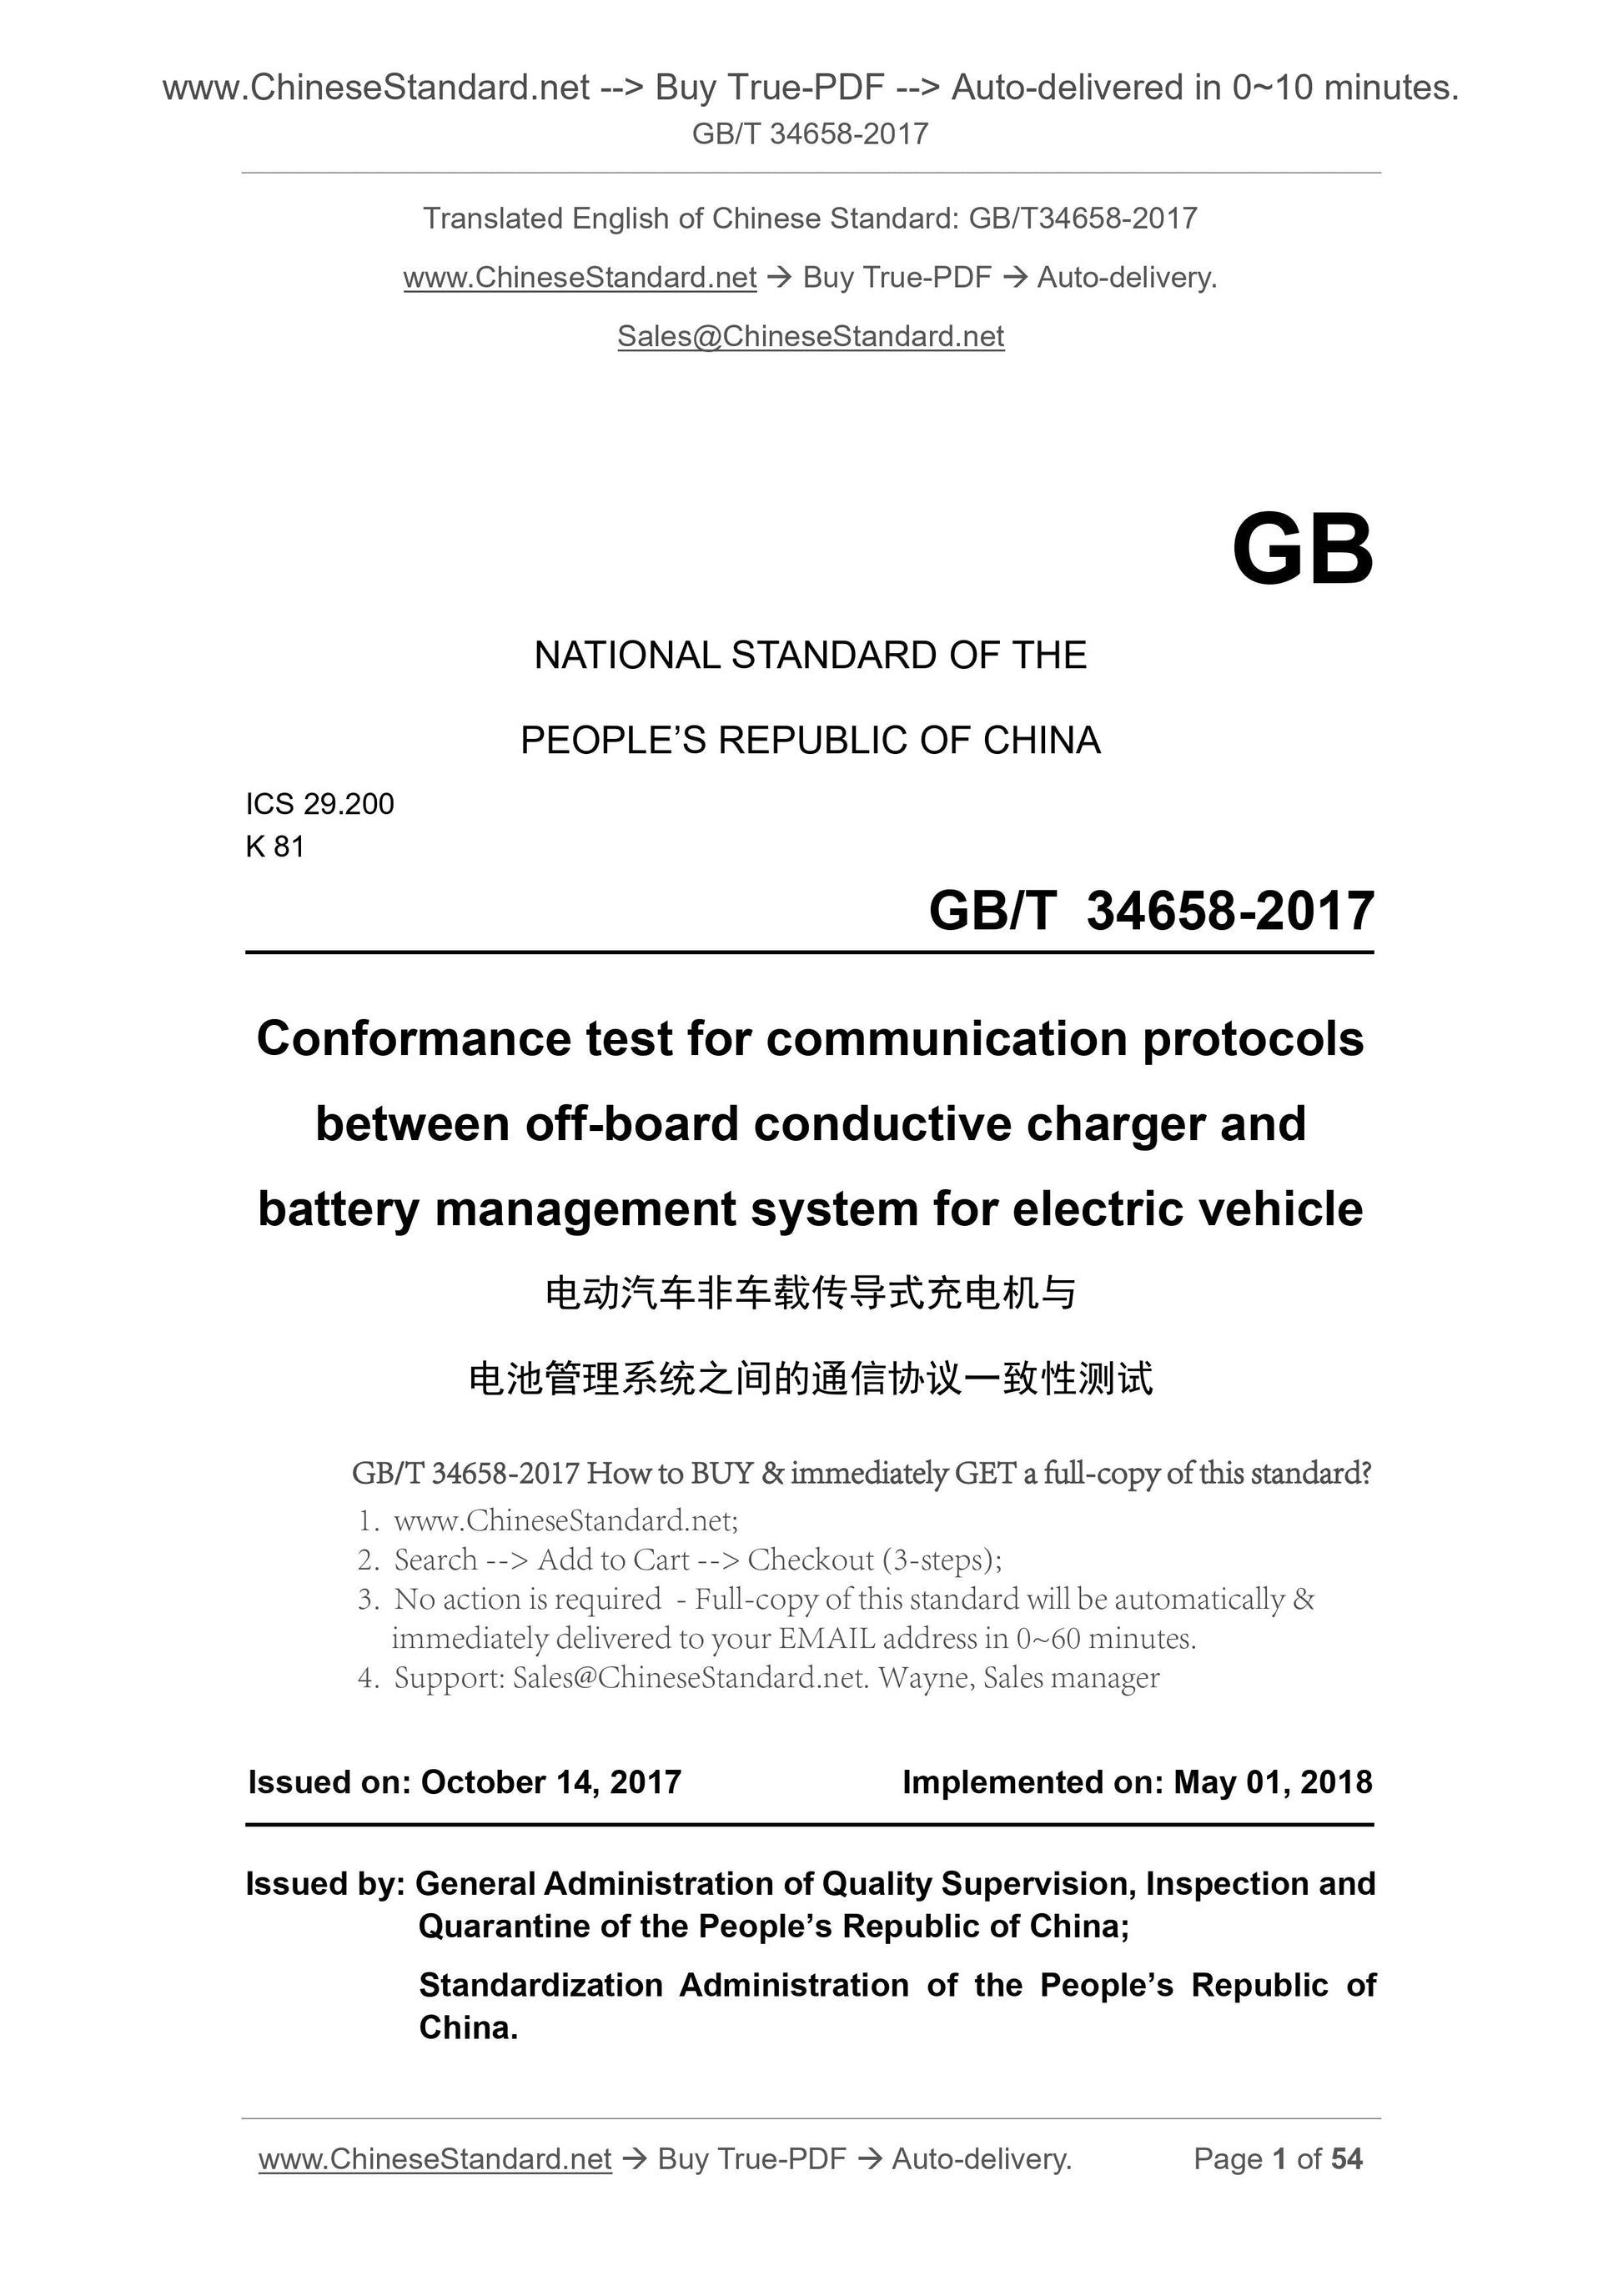 GB/T 34658-2017 Page 1